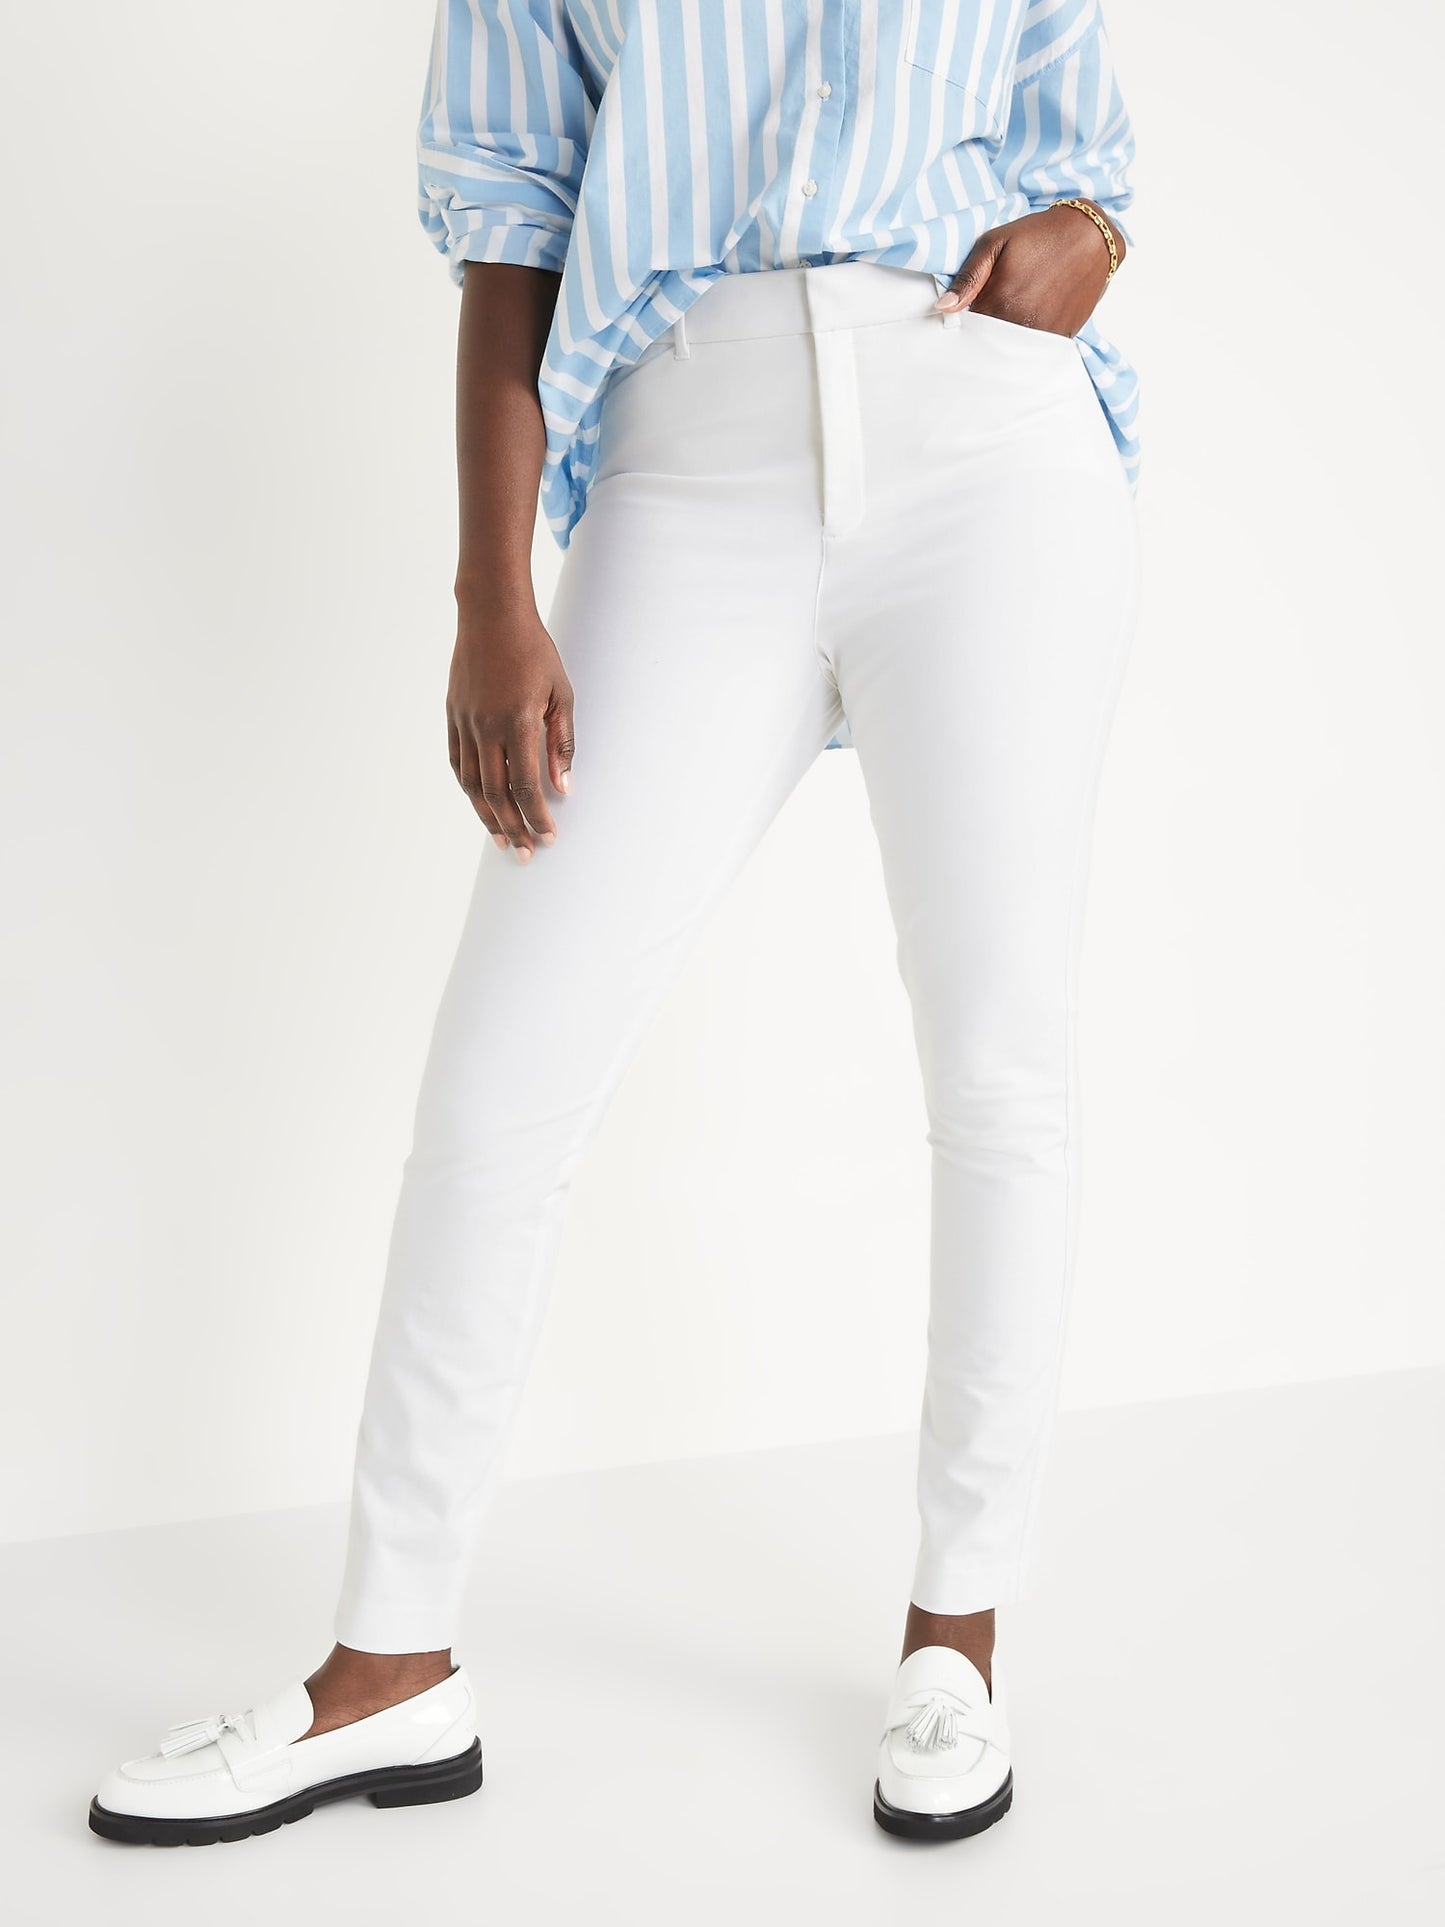 ON High-Waisted White Pixie Ankle Pants For Women - Bright White